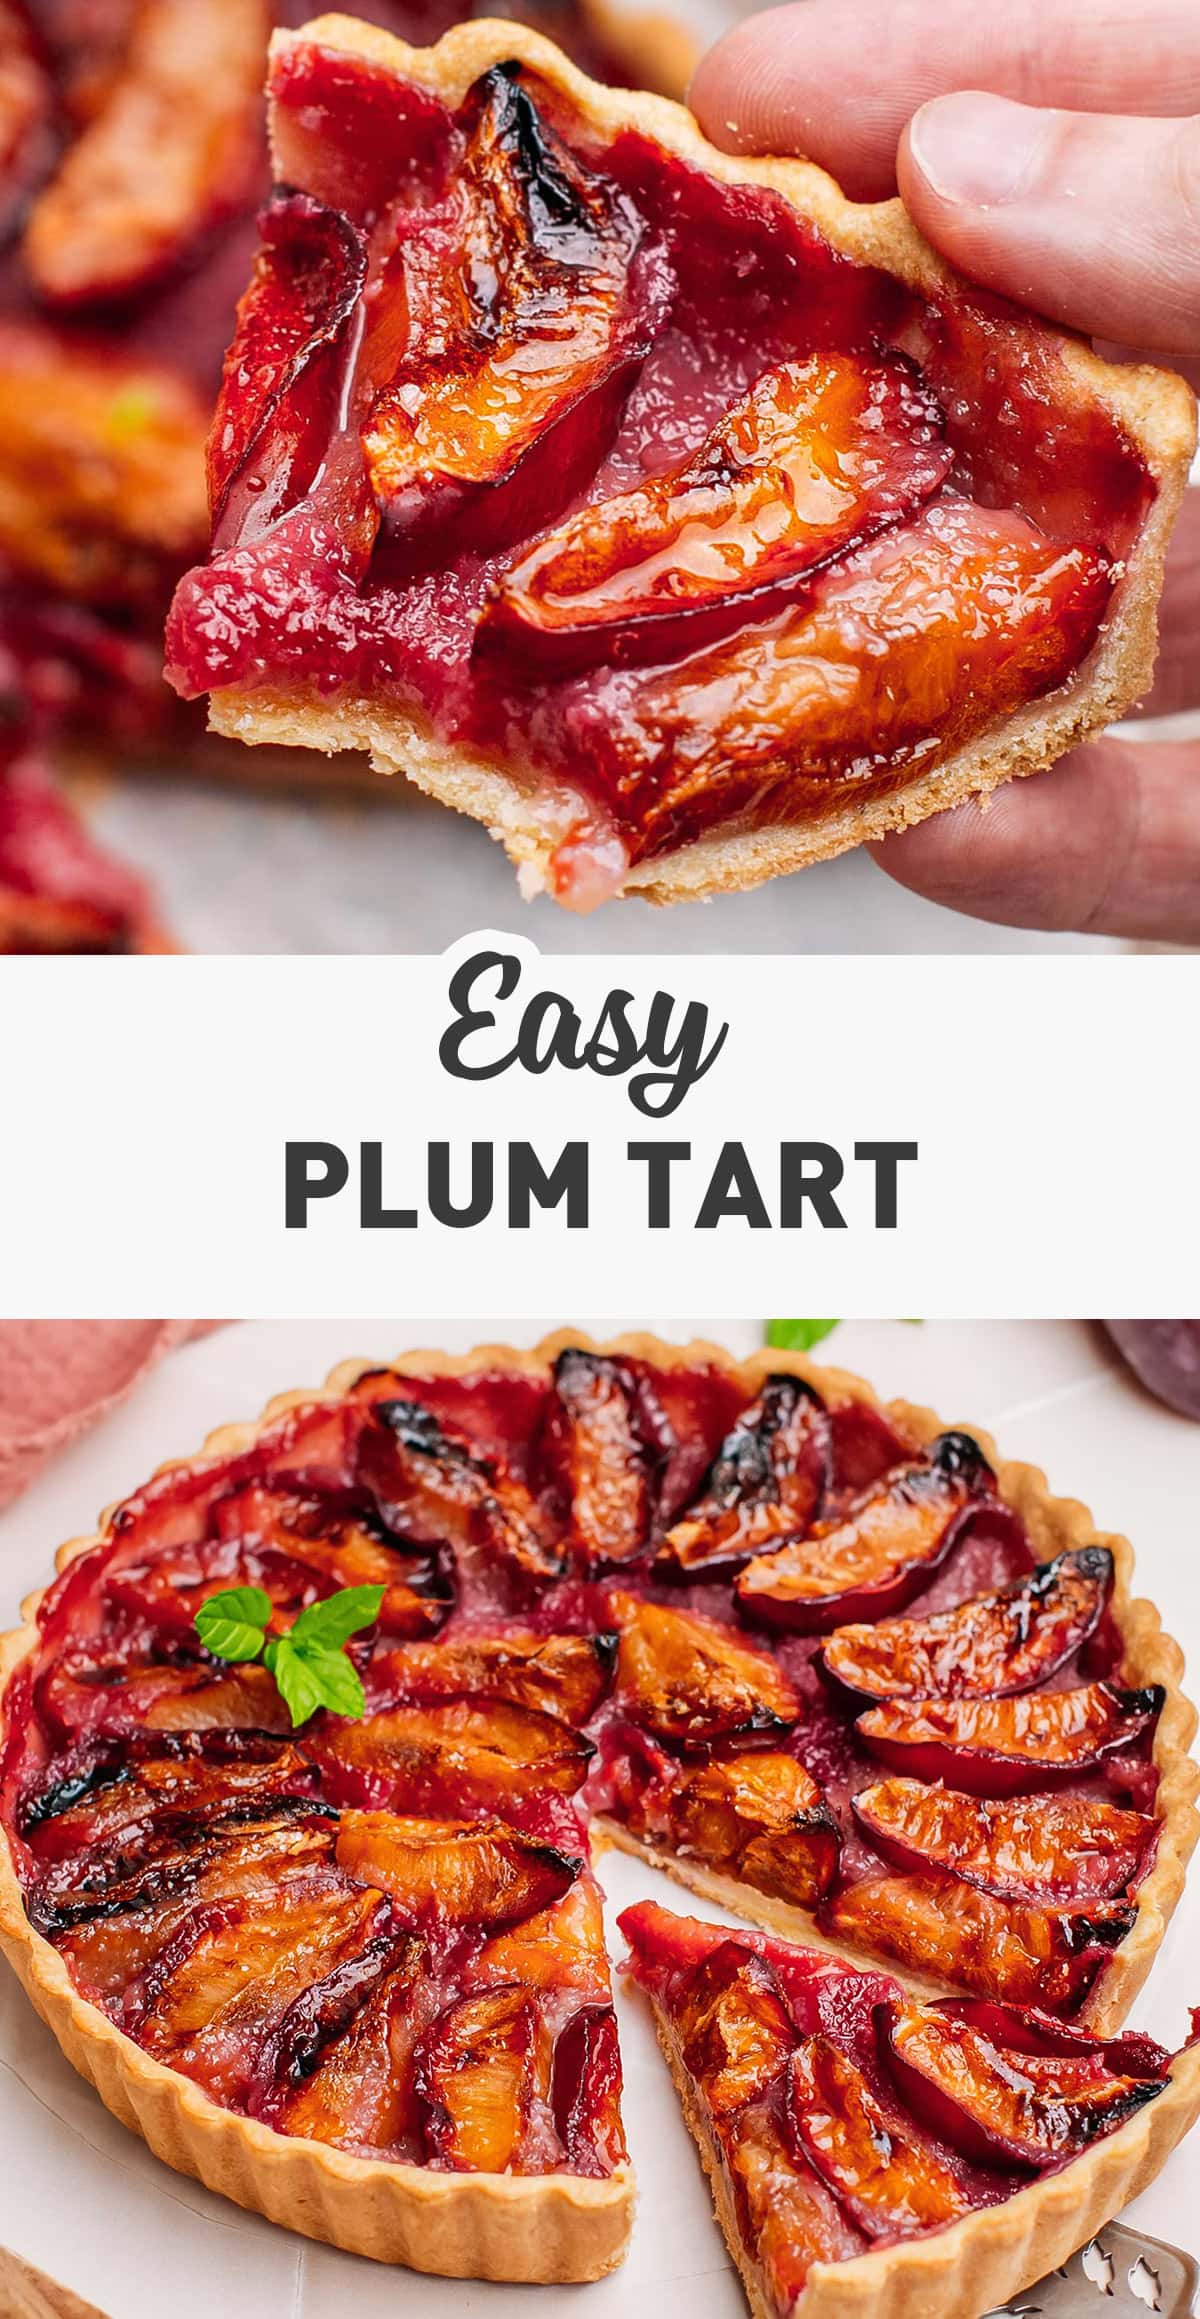 Make the most of plum season by baking this sweet and fruity French-inspired plum tart! Ripe and juicy plums are arranged on a buttery, flaky pie crust and baked until they caramelize to perfection. A delicious Fall dessert that can be served with a scoop of vanilla ice cream! #plum #tart #vegan #veganbaking